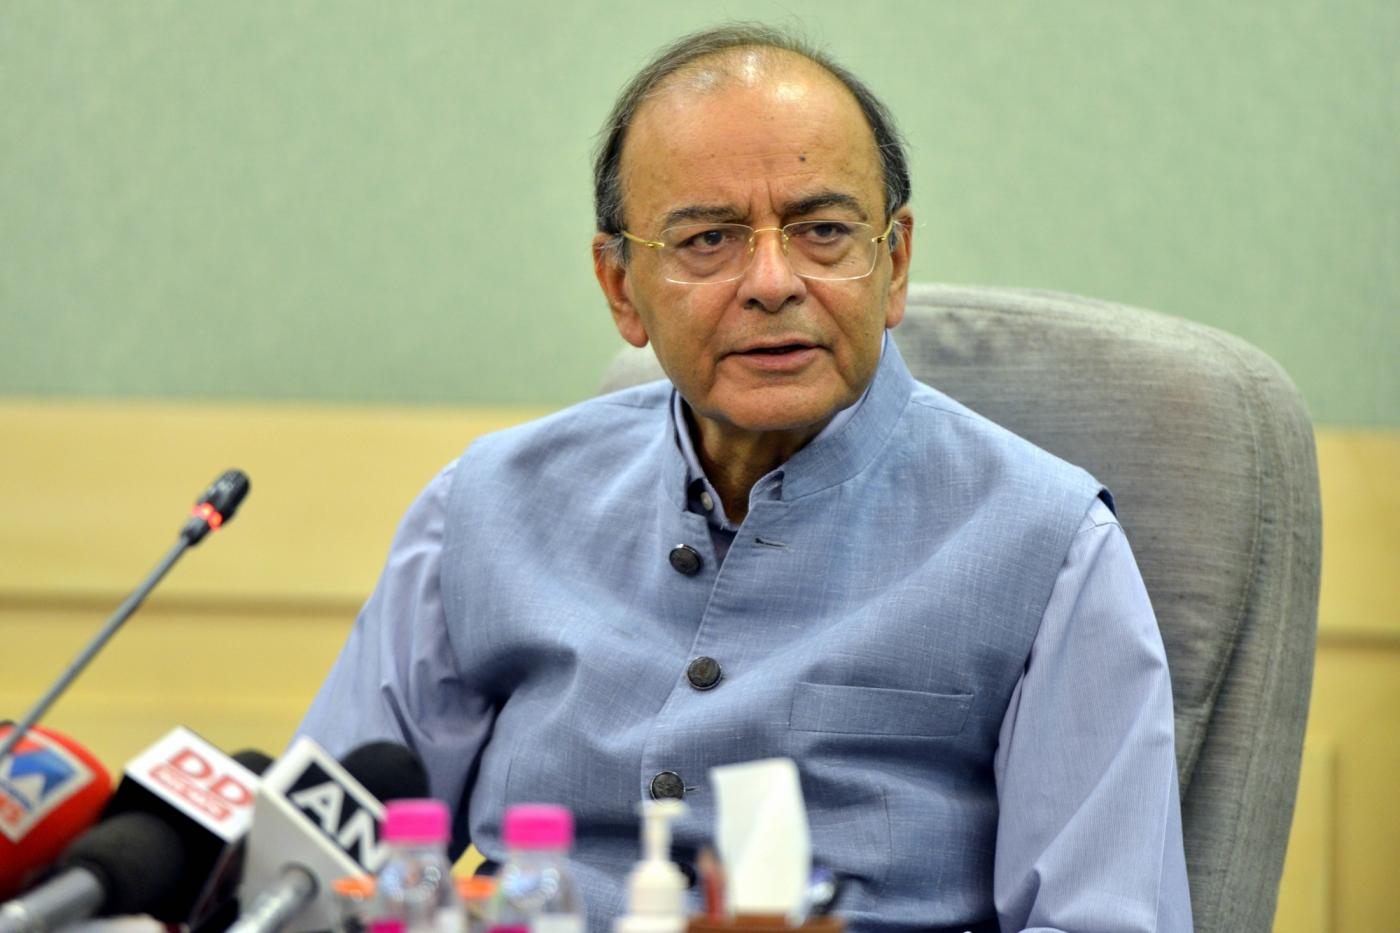 New Delhi: Union Finance and Corporate Affairs Minister Arun Jaitley addresses a press conference, in New Delhi on Oct 4, 2018. (Photo: IANS) by .